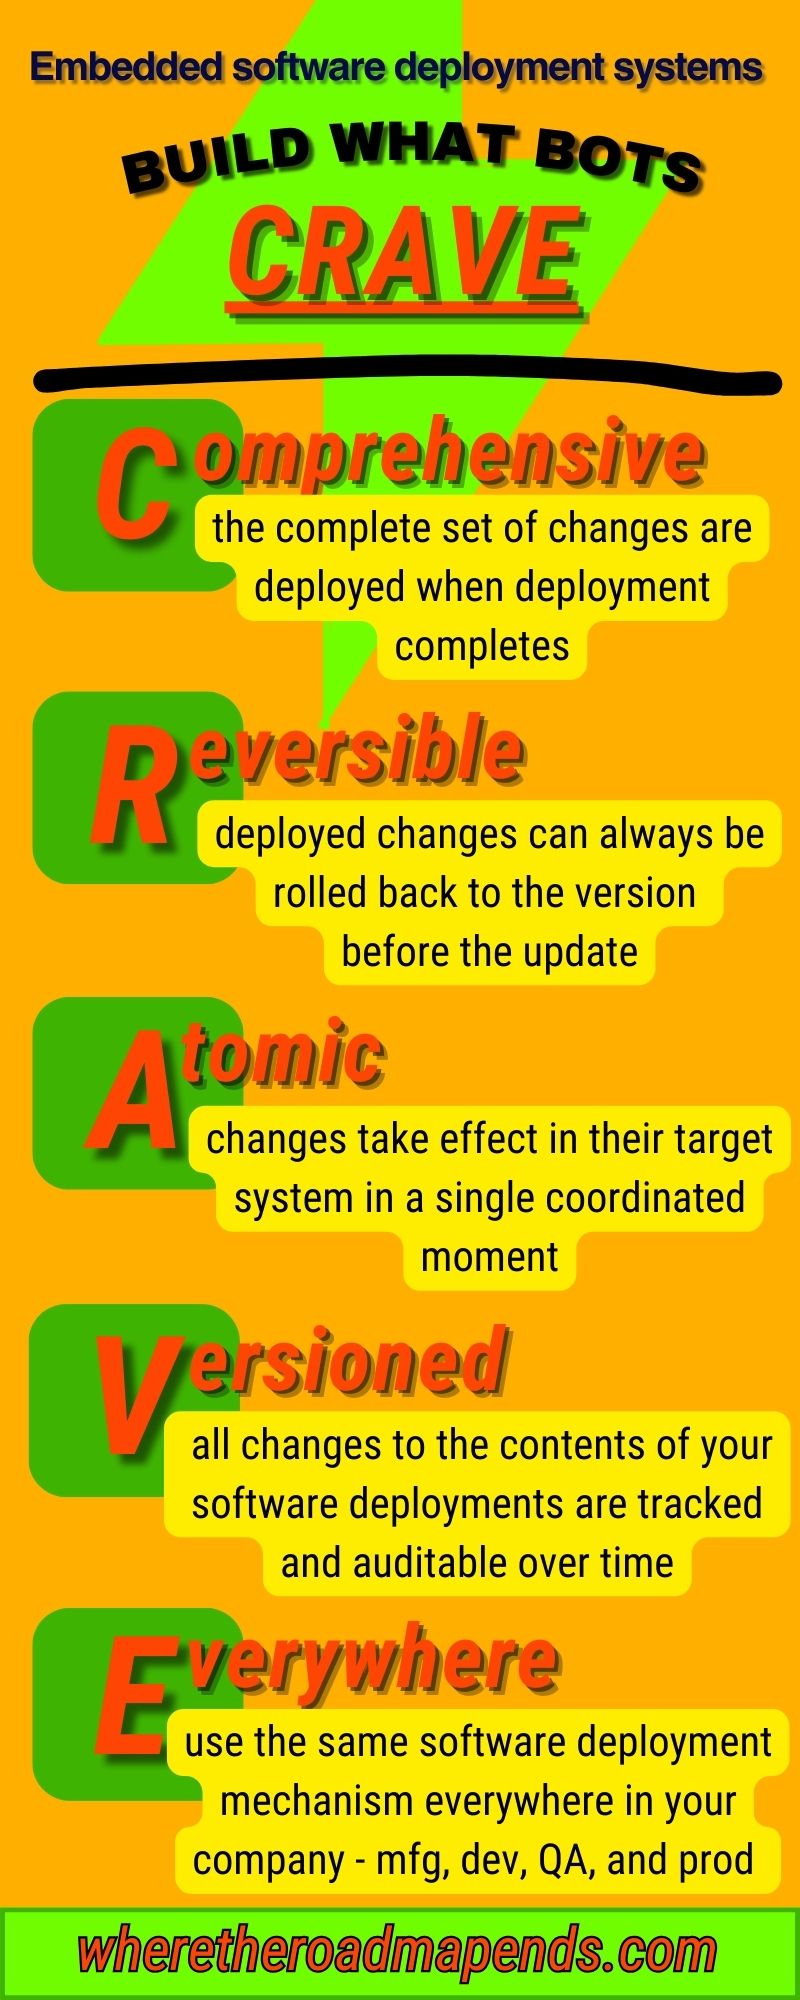 An infographic describing the CRAVE acronym for embedded software deployment system design (Comprehensive, Reversible, Atomic, Versioned, Everywhere)